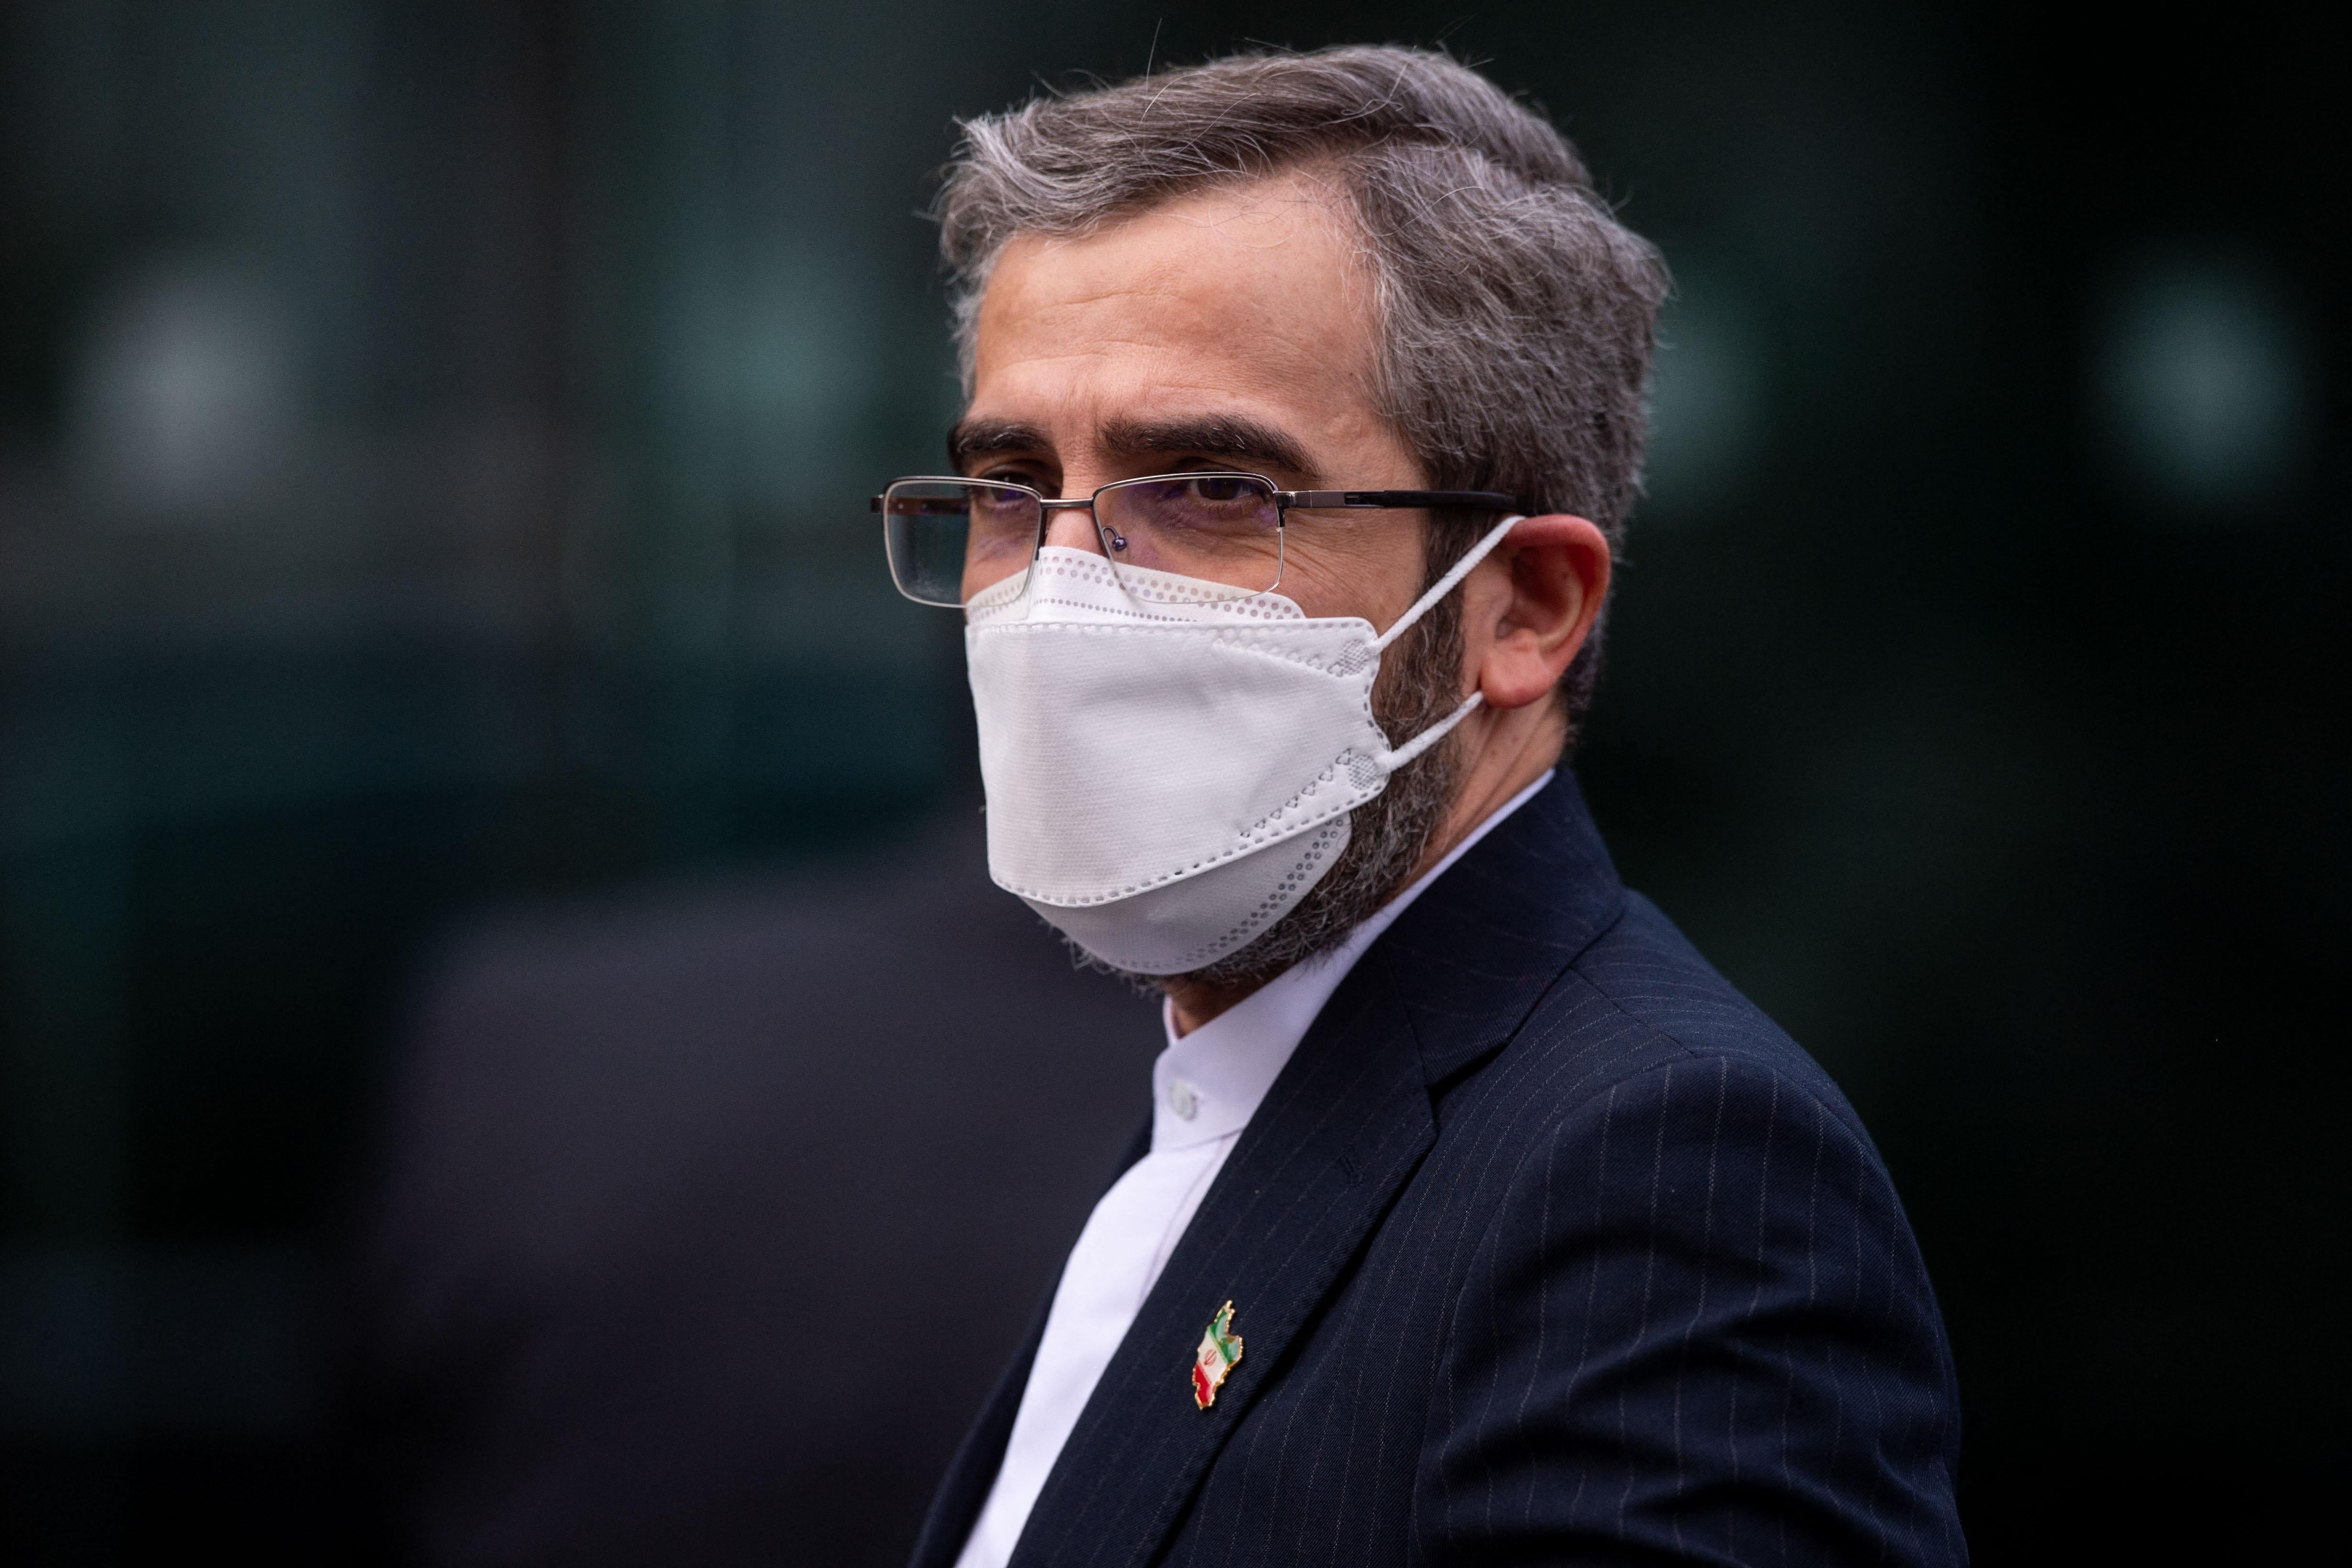 A close-up of Ali Bagheri Kani wearing a white mask and a suit